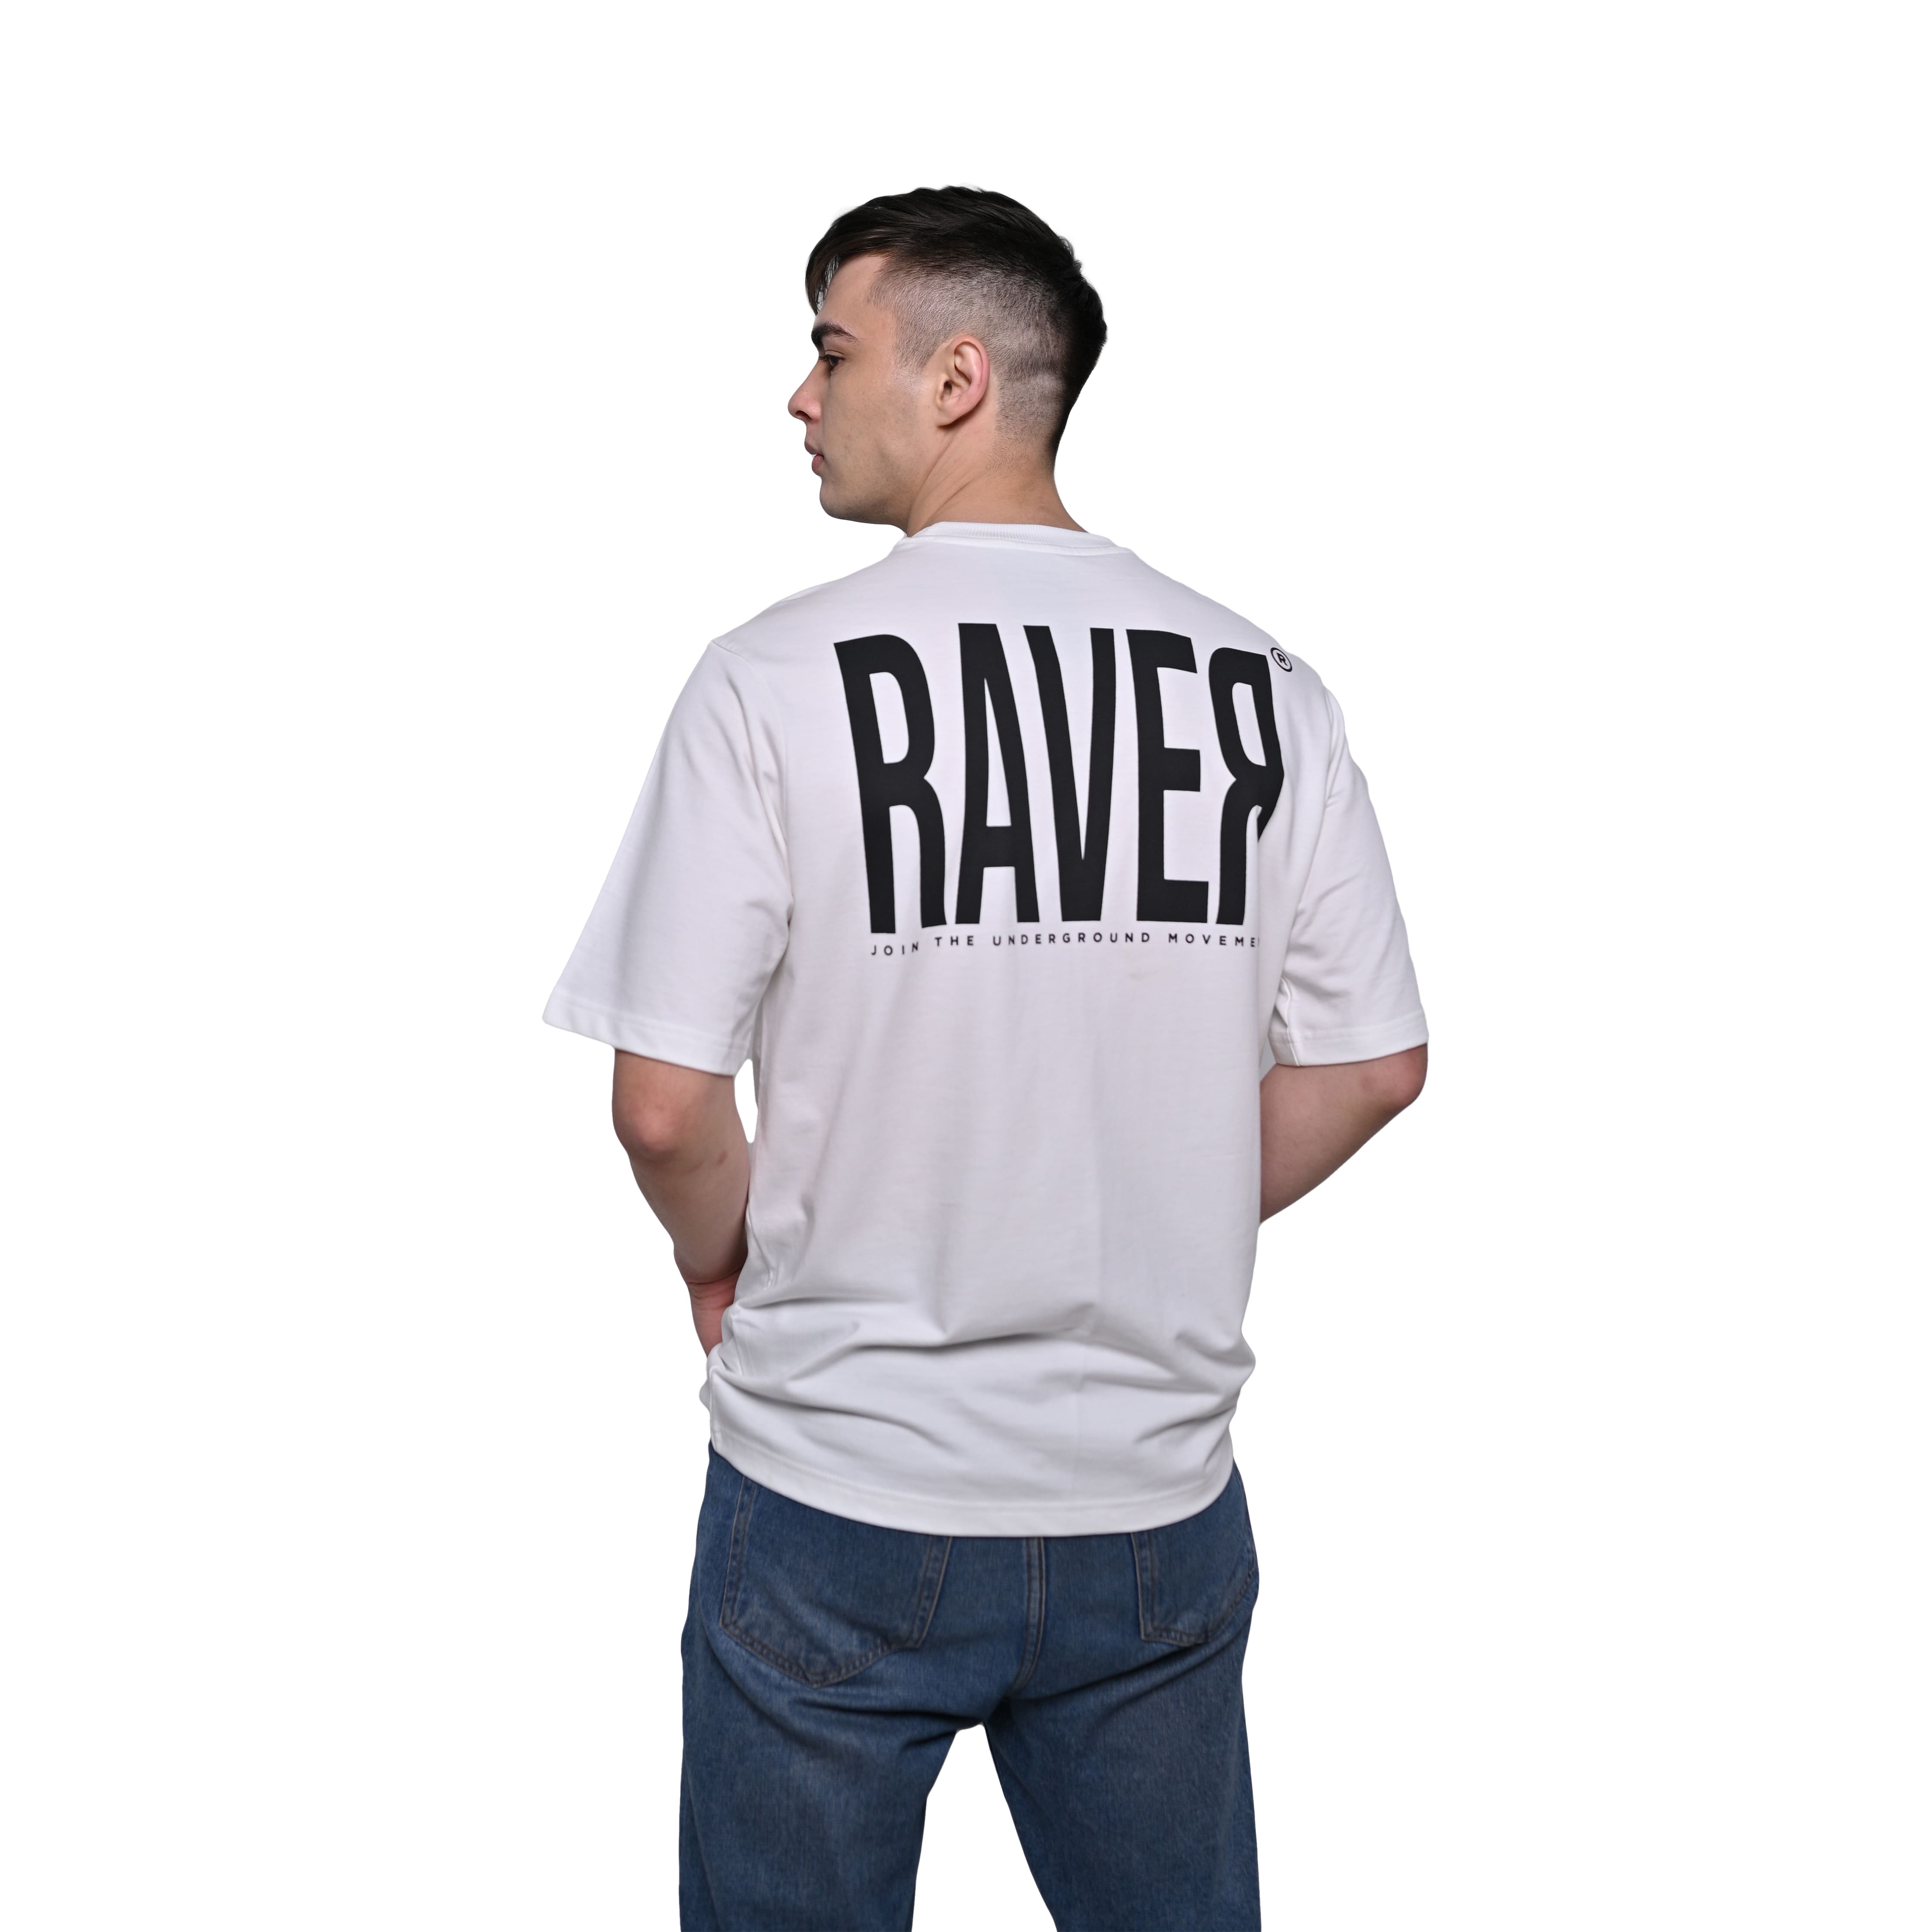 Raver - Techno Be With You_ Clothing  Shop Raver Printed Pure Cotton T-Shirt Online  